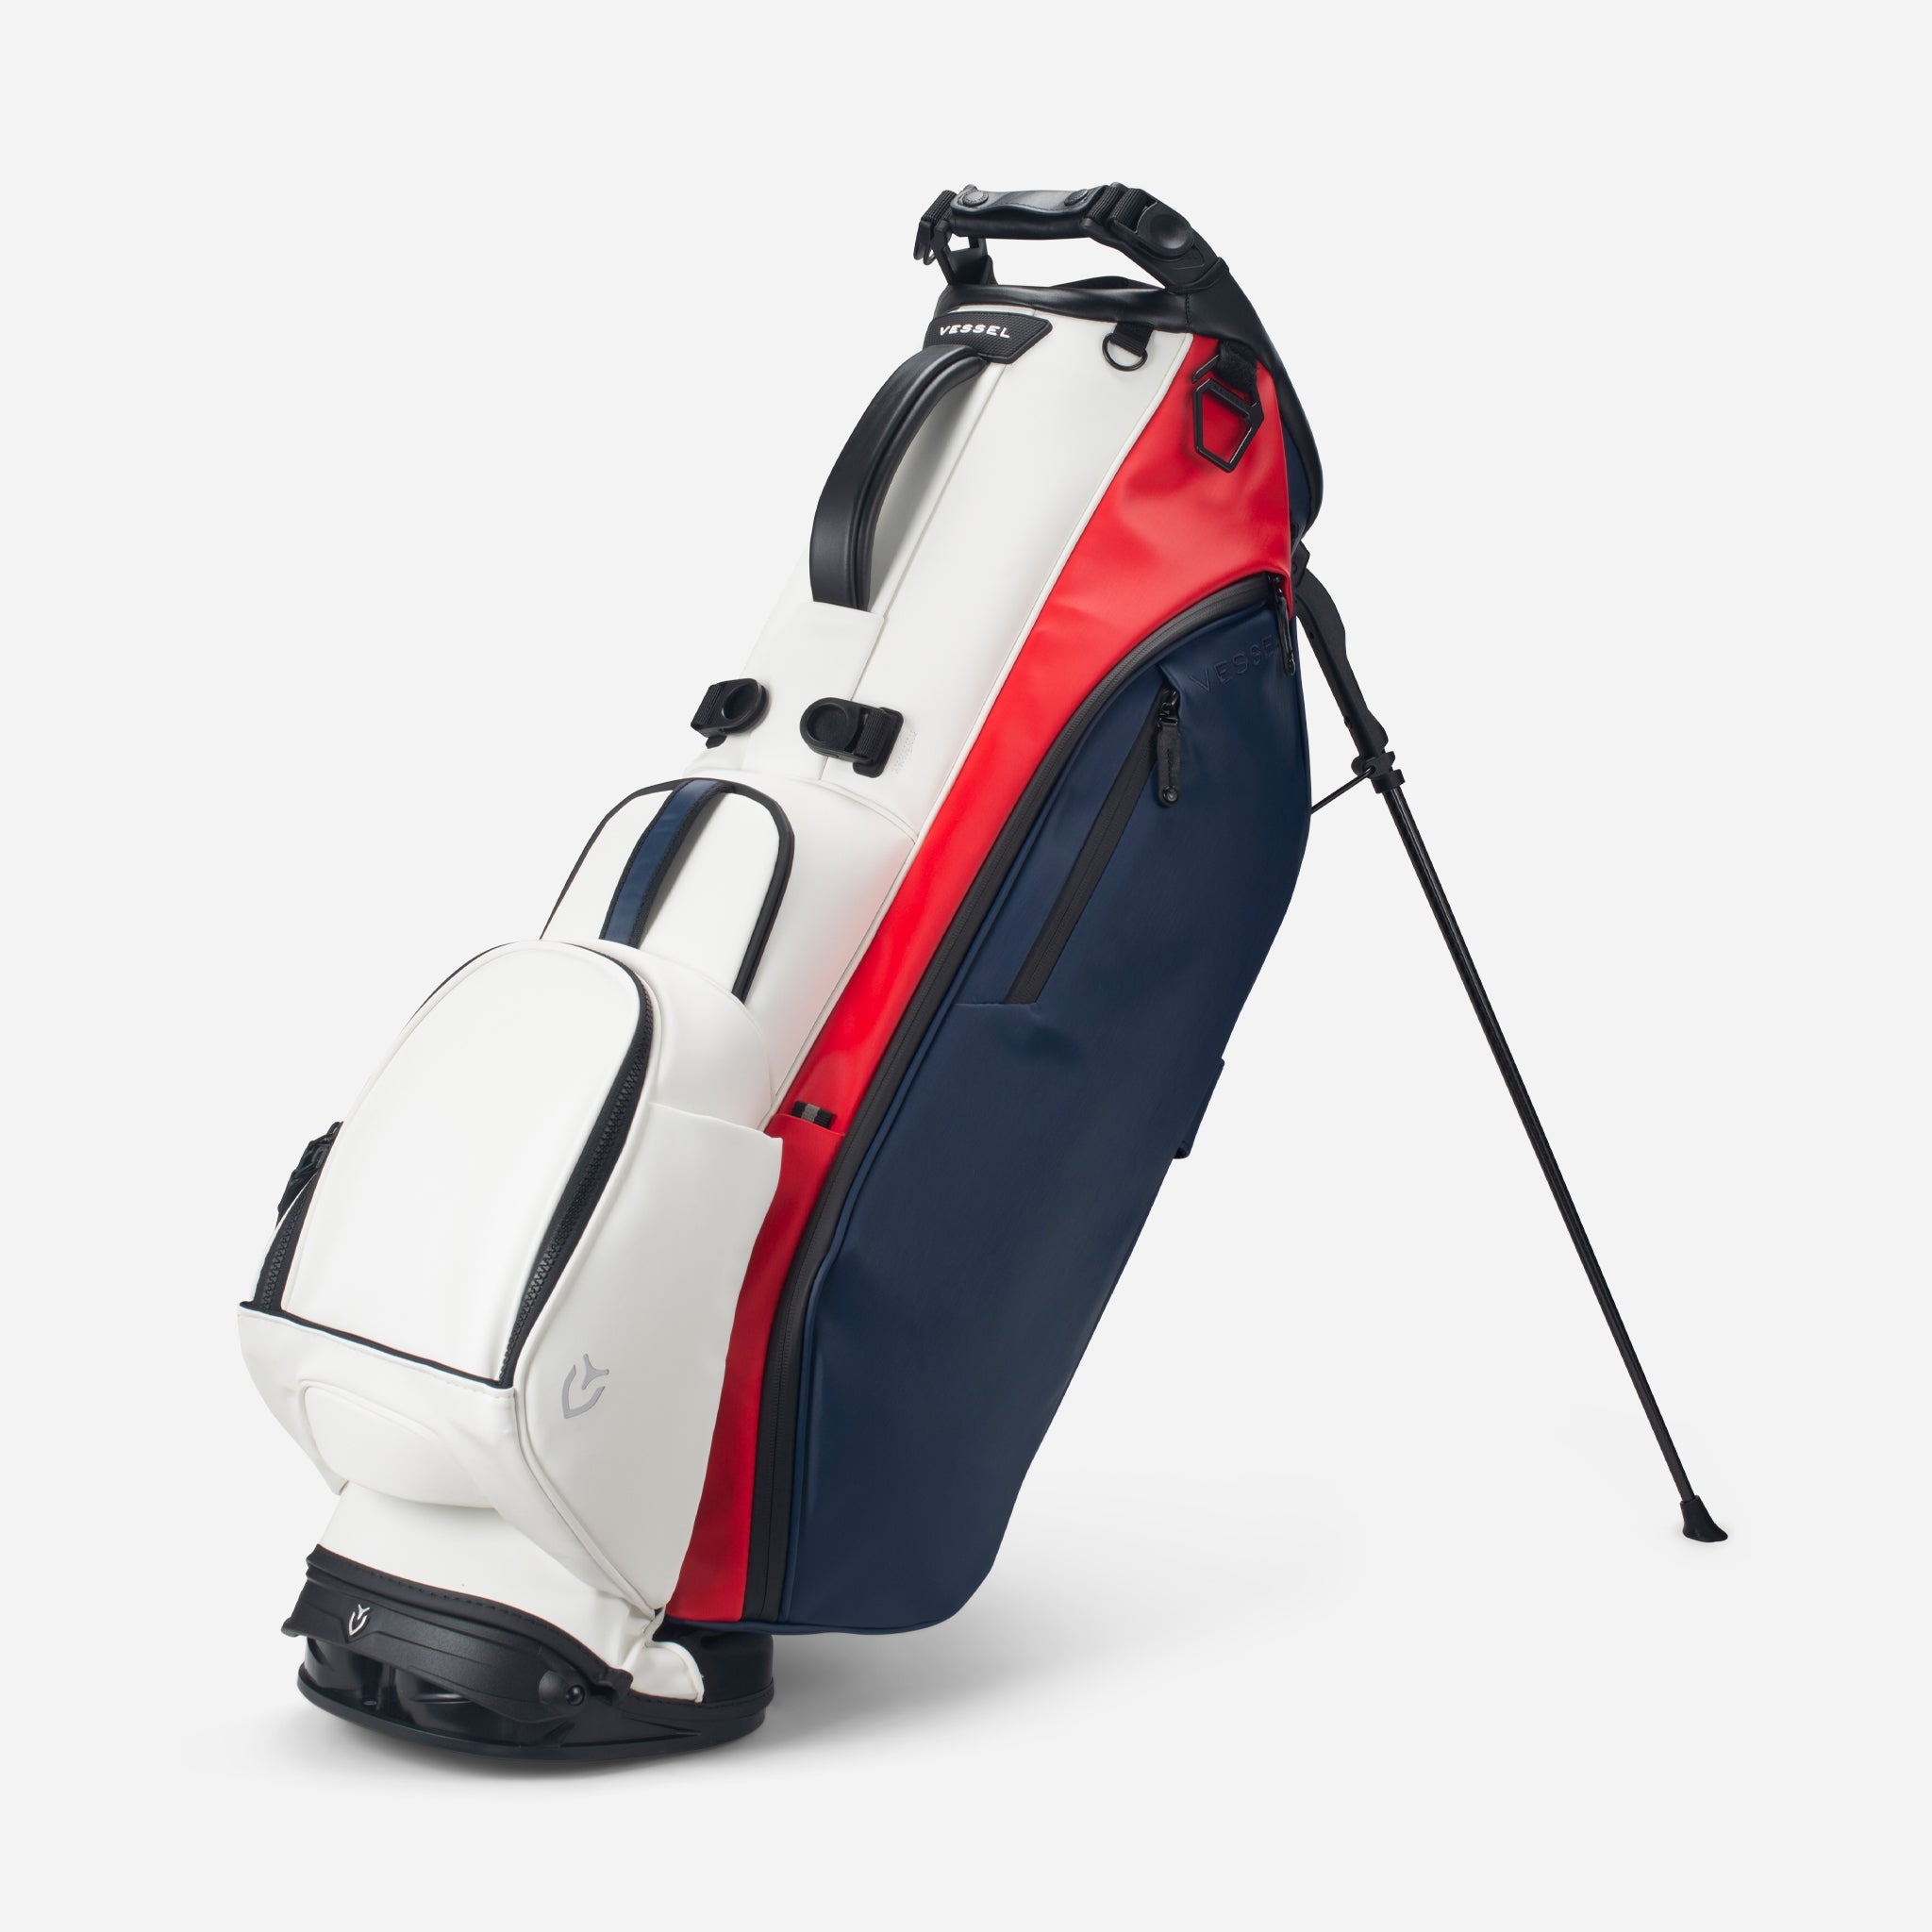 EQUIPMENT: Vessel Releases New Colorways for Players III Stand Bags